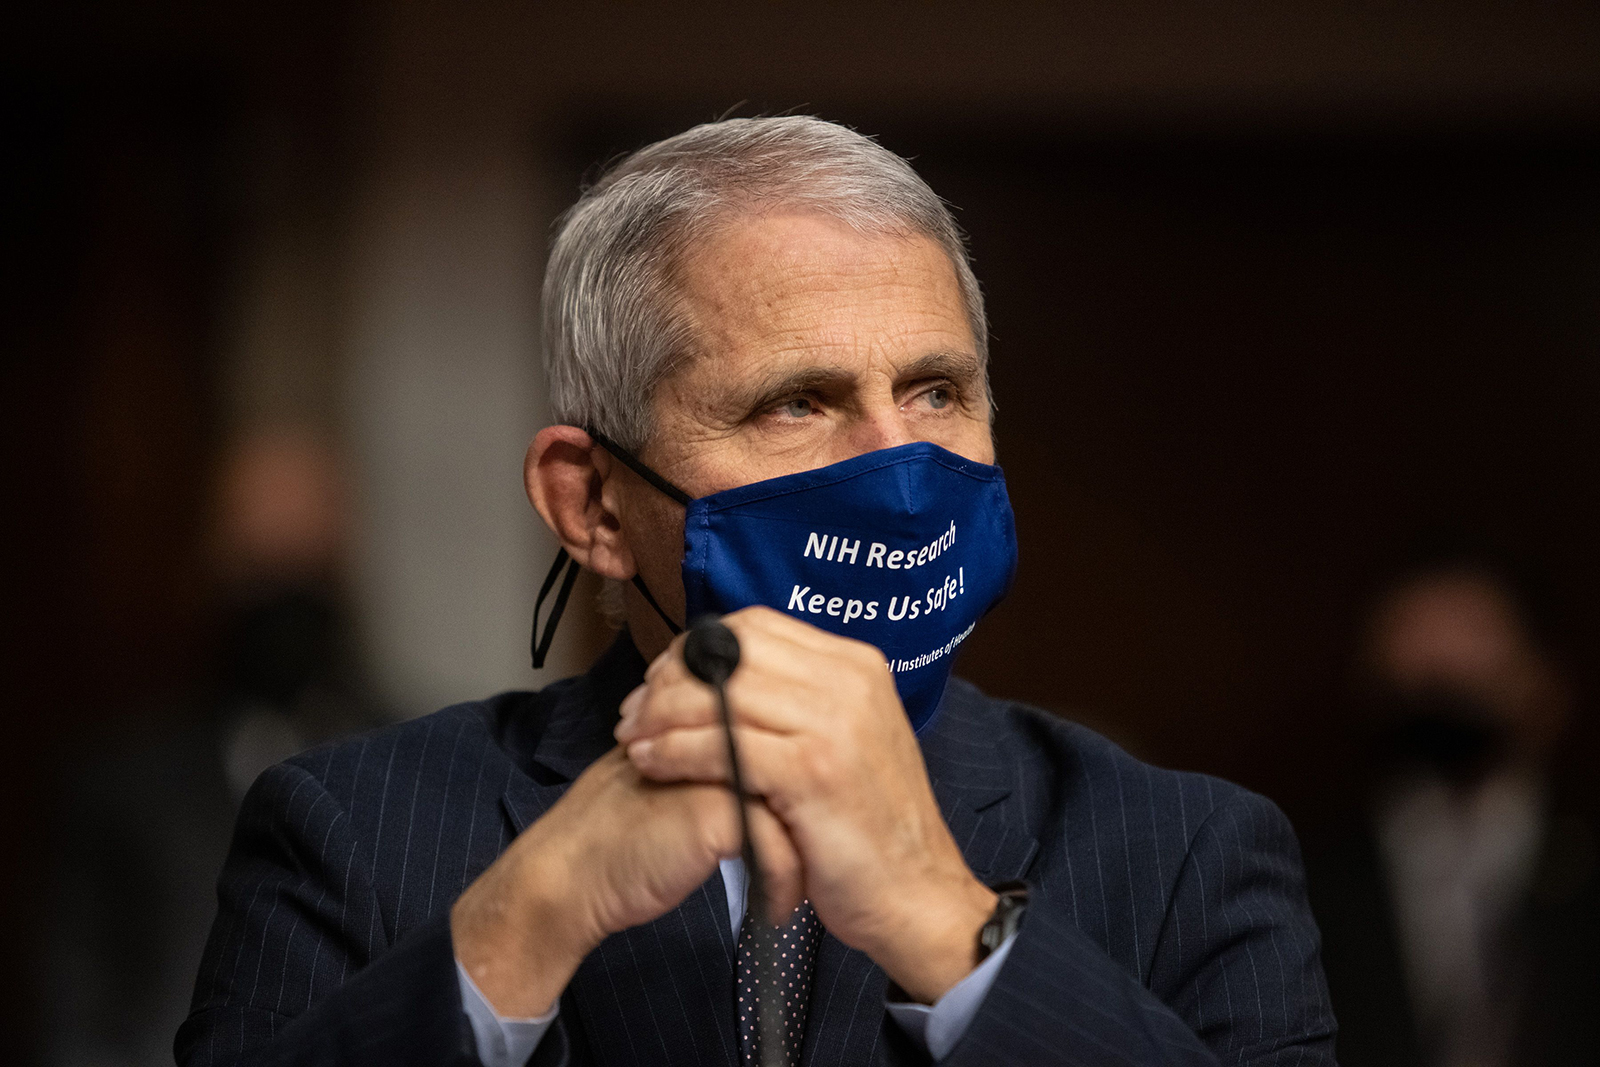 Dr. Anthony Fauci,Director, National Institute of Allergy and Infectious Diseases testifies during a US Senate  hearing to examine Covid-19, in Washington, DC, on September 23.